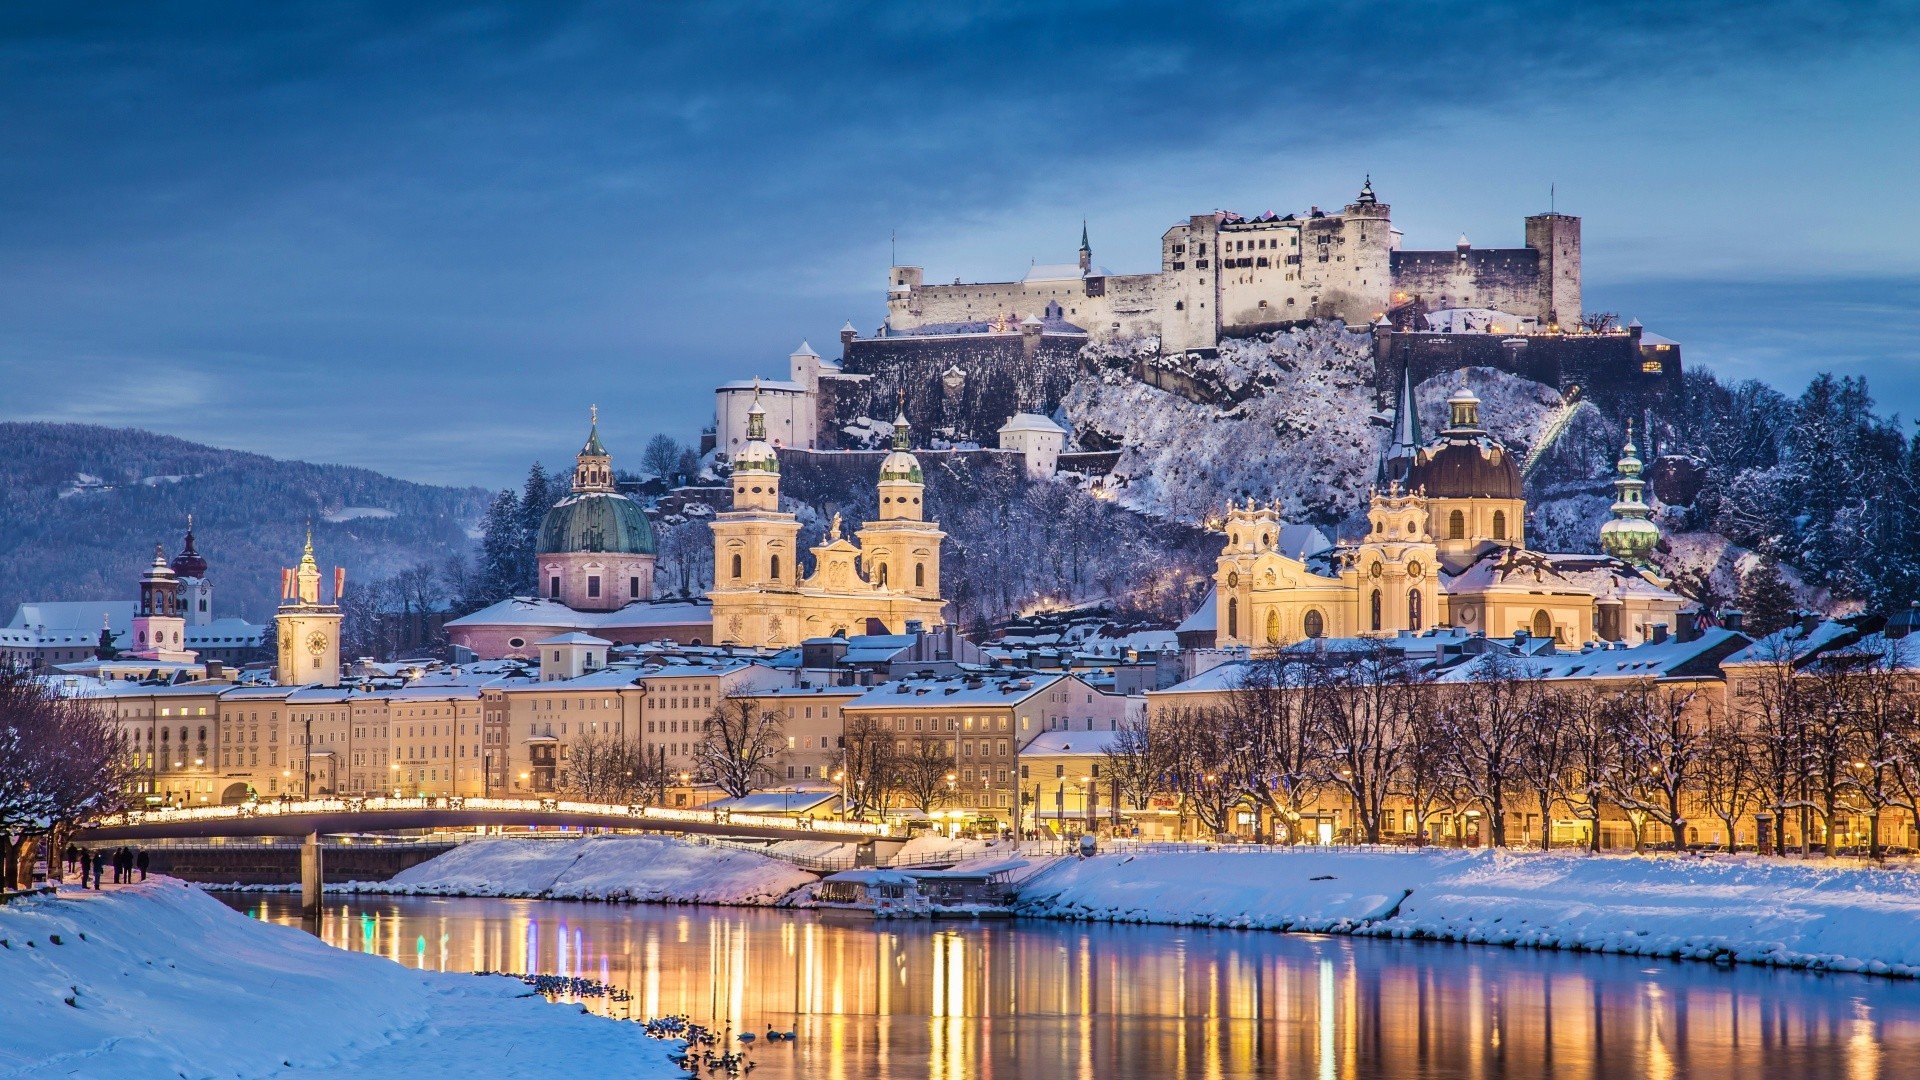 architecture, Castle, Ancient, Tower, Austria, Salzburg, Winter, Snow, River, Trees, Hills, Clouds, Evening, Reflection, Lights, Cathedral, Building, Church, Bridge, Forest Wallpaper